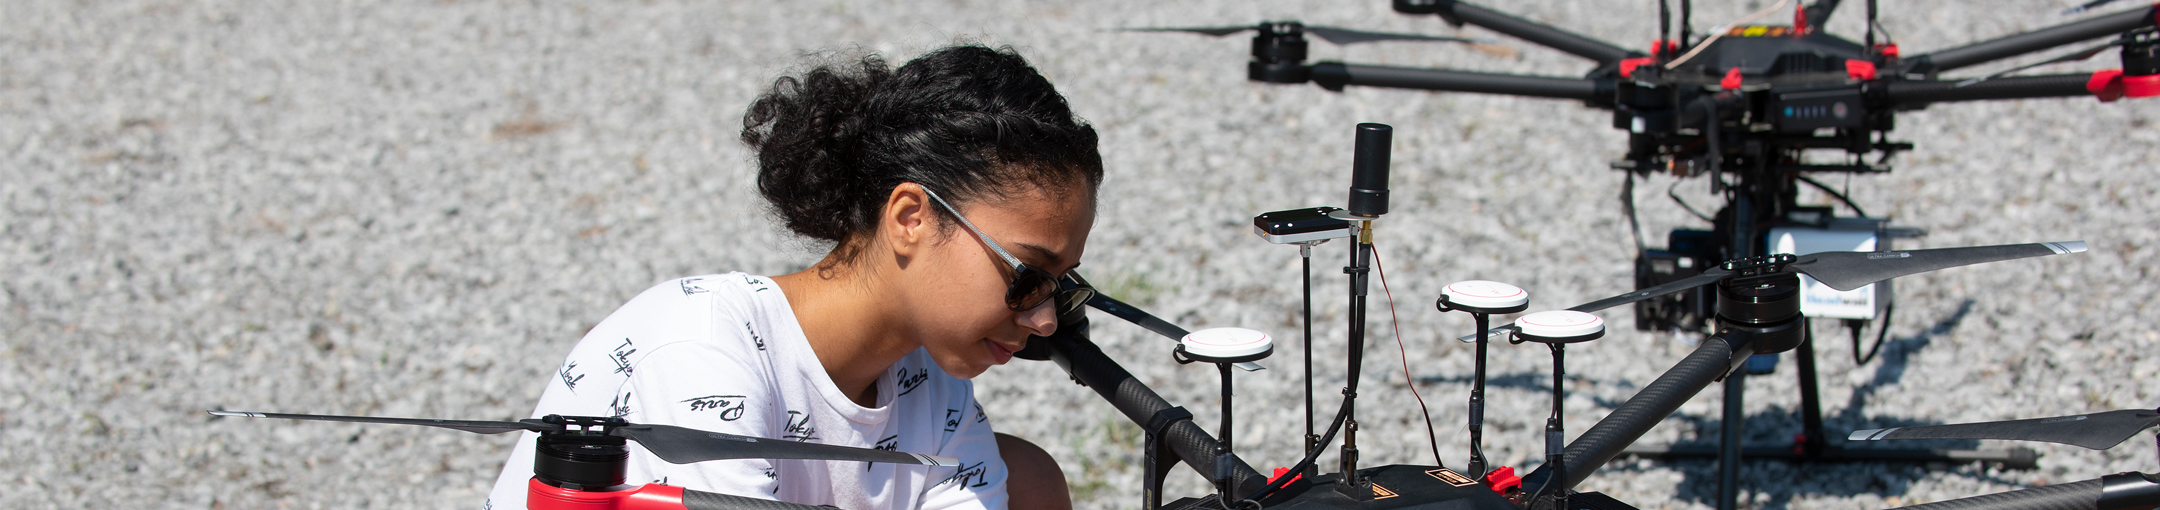 imaging science student working on drones